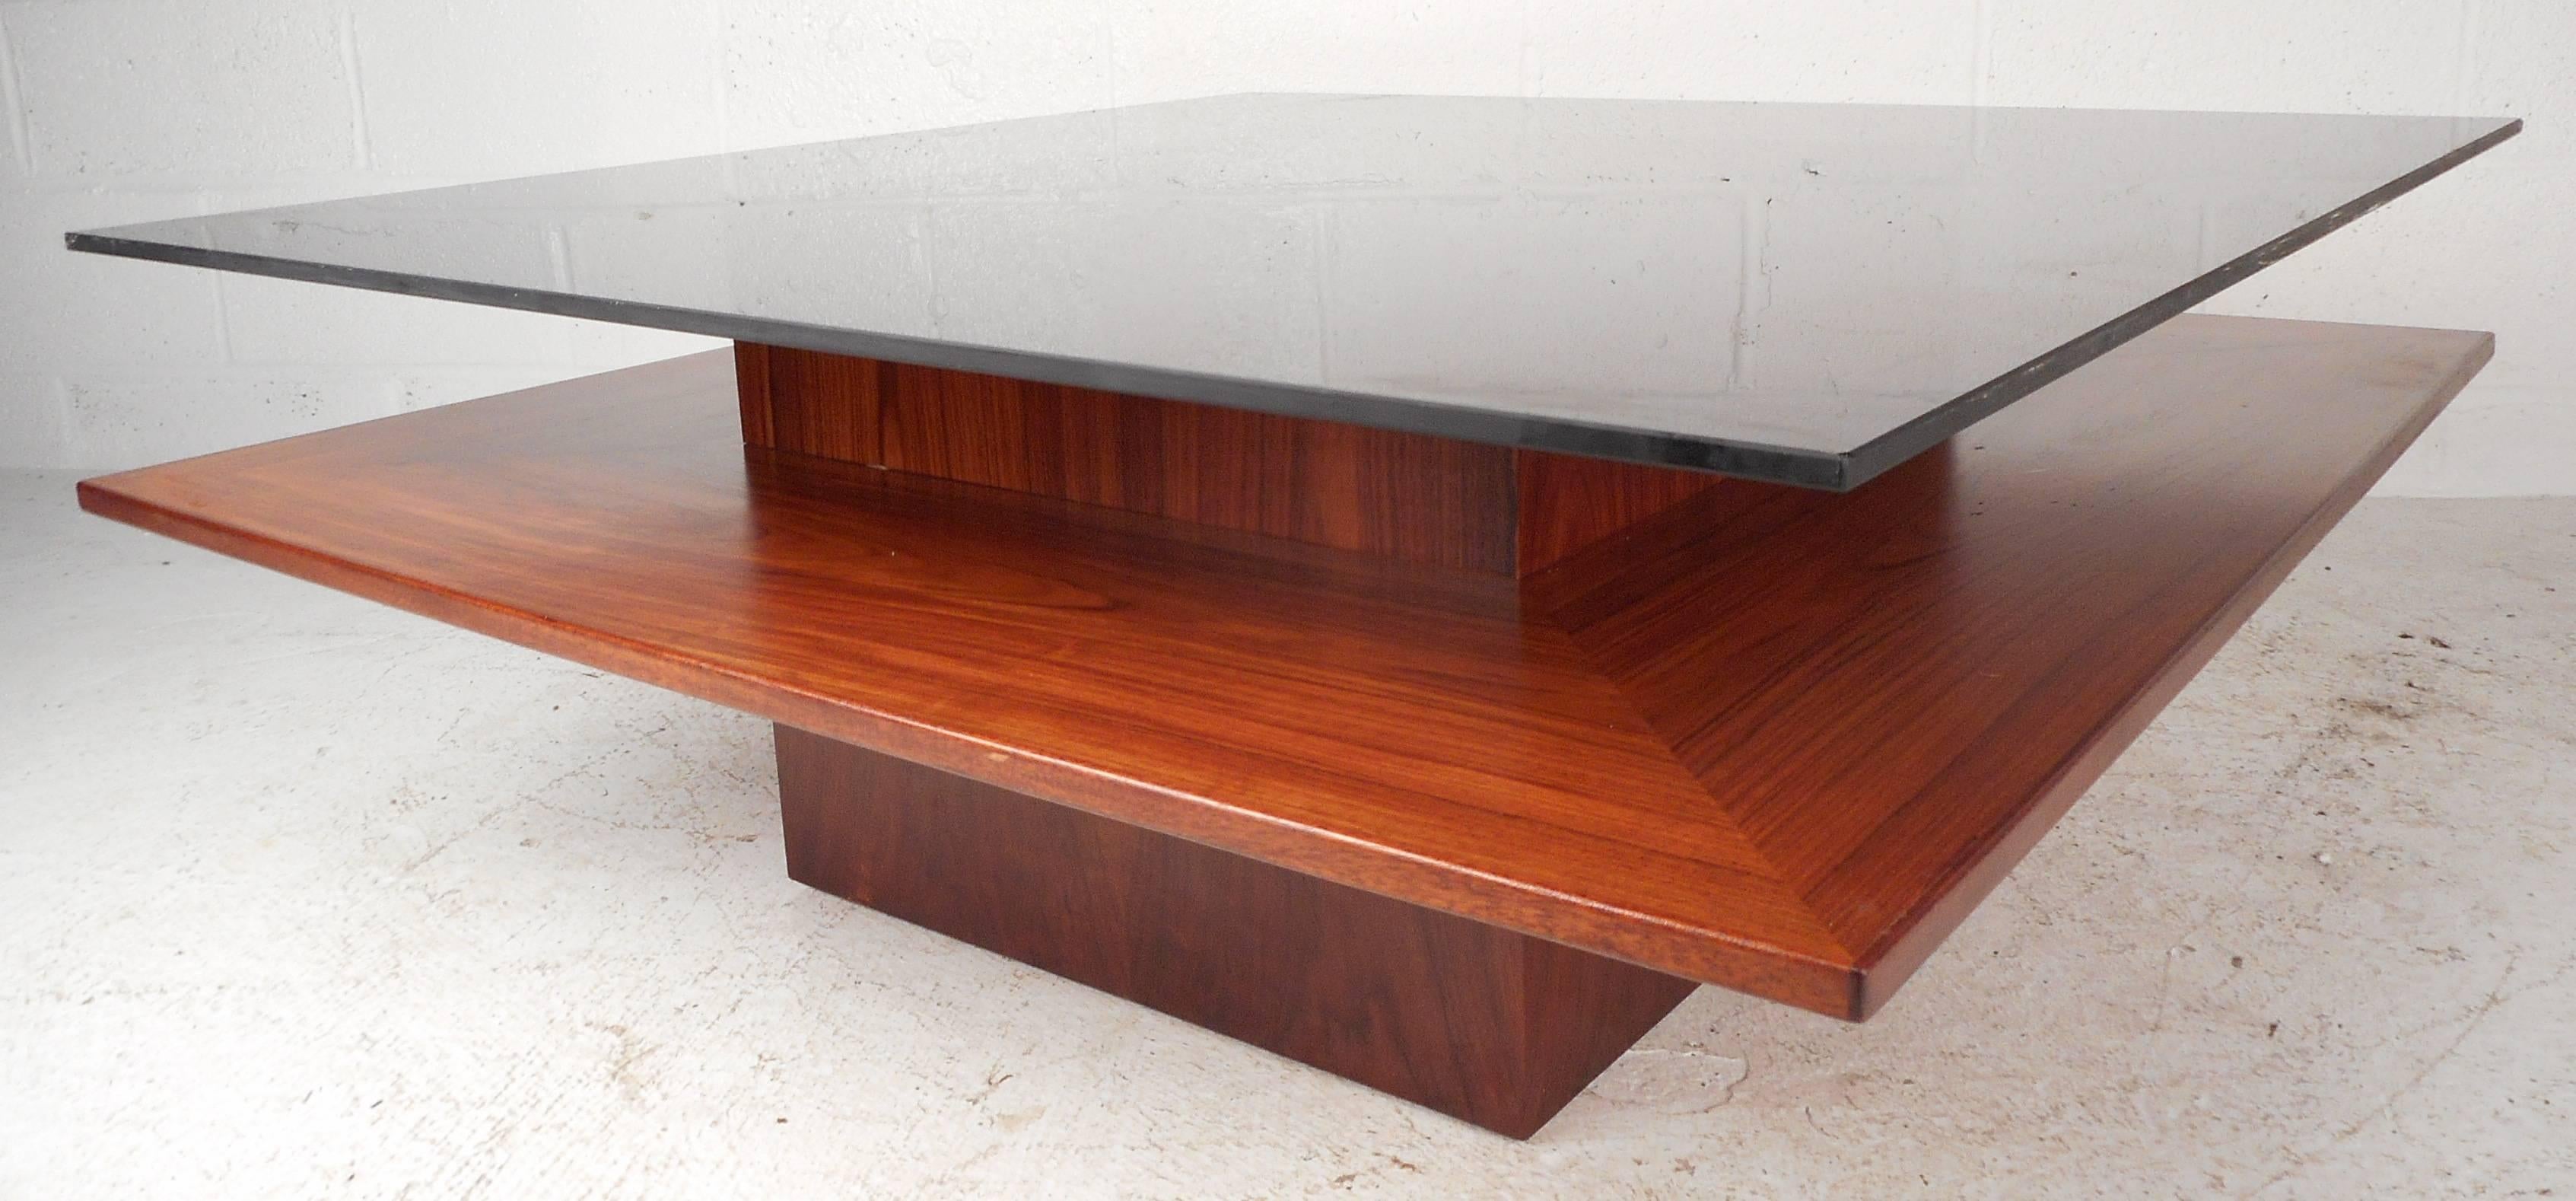 Elegant Mid-Century teak coffee table features a two-tier design with wood finish and smoked glass. A unique base provides style and sturdiness, while the smoked glass wonderfully compliments the vintage finish. Please confirm item location (NY or